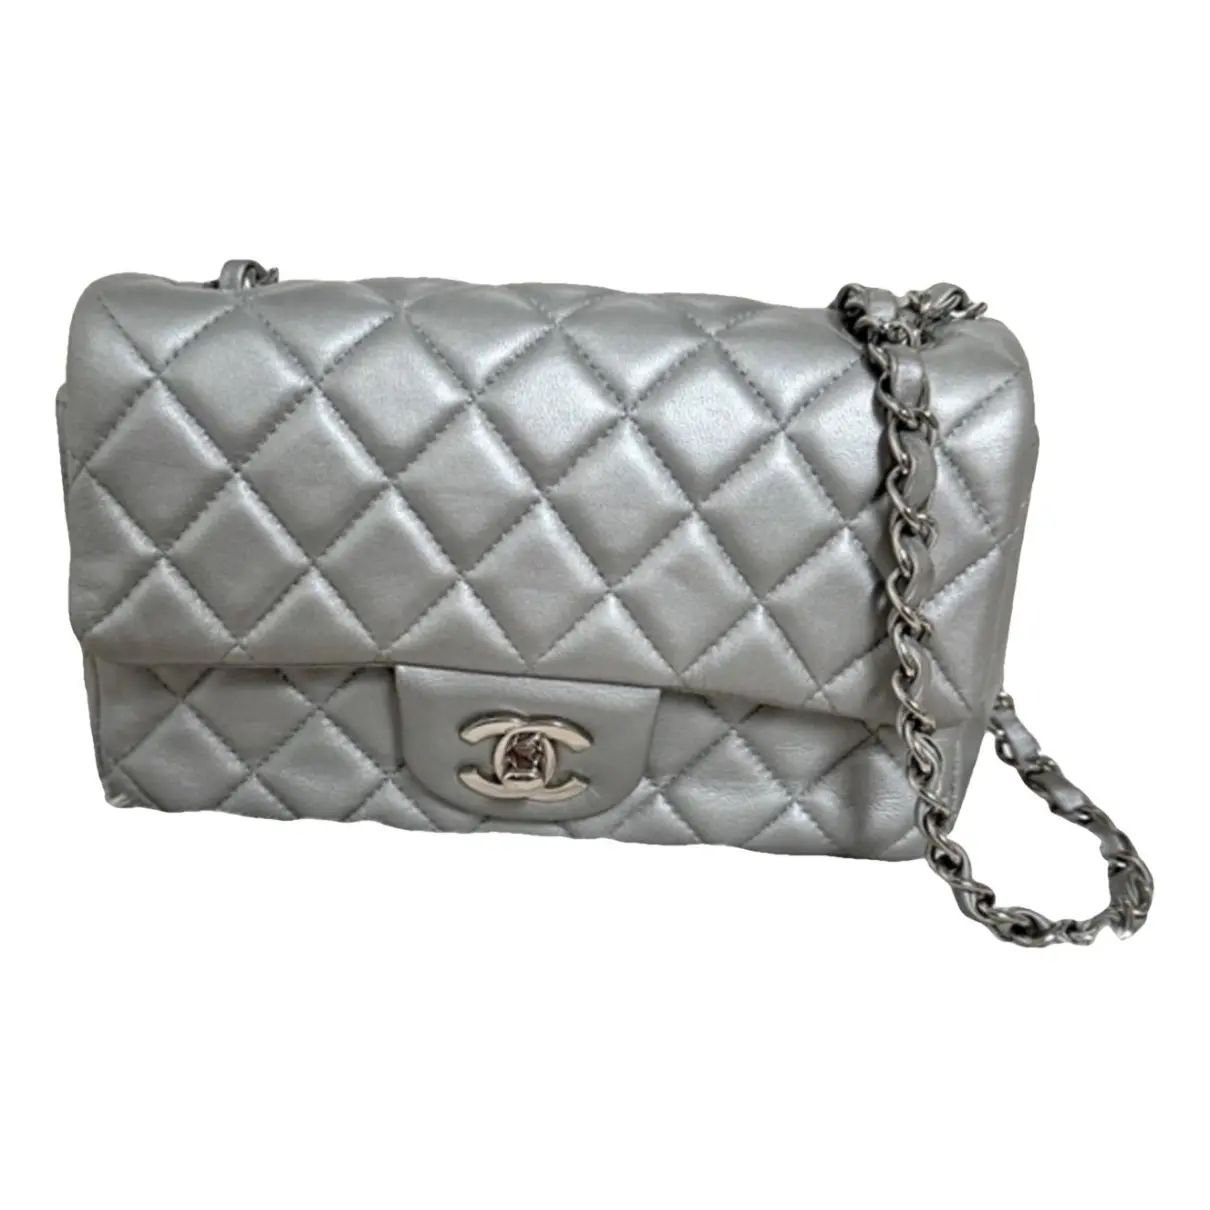 Trendy cc flap leather handbag Chanel Silver in Leather - 43203101 | Vestiaire Collective (Global)